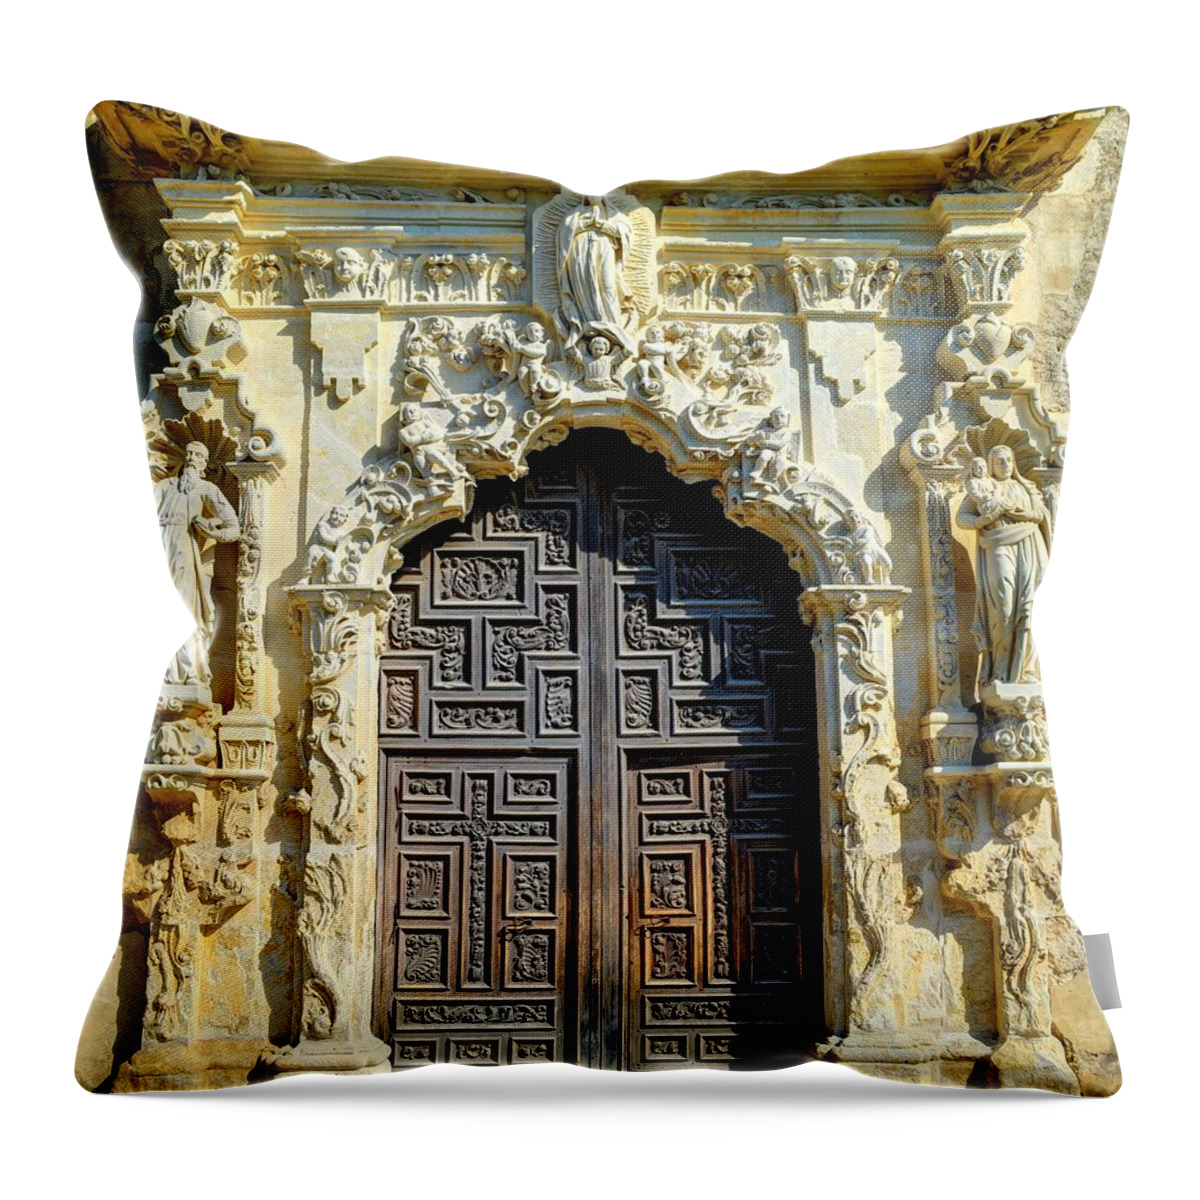 San Jose Throw Pillow featuring the photograph Mission Door by David Morefield